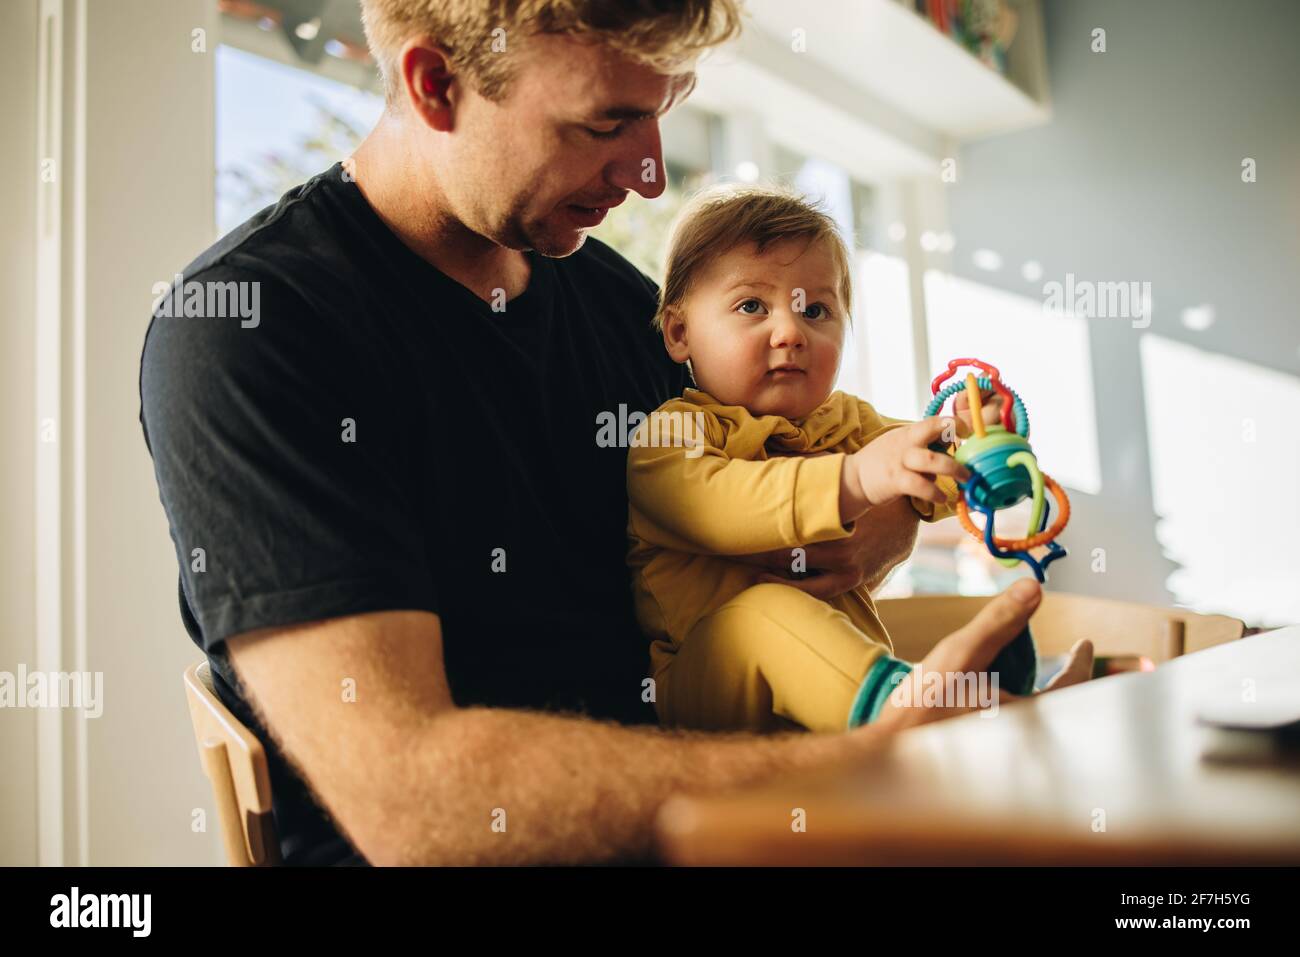 Man spending quality time with his adorable child at home. Man on paternity leave at home taking care of his son. Stock Photo